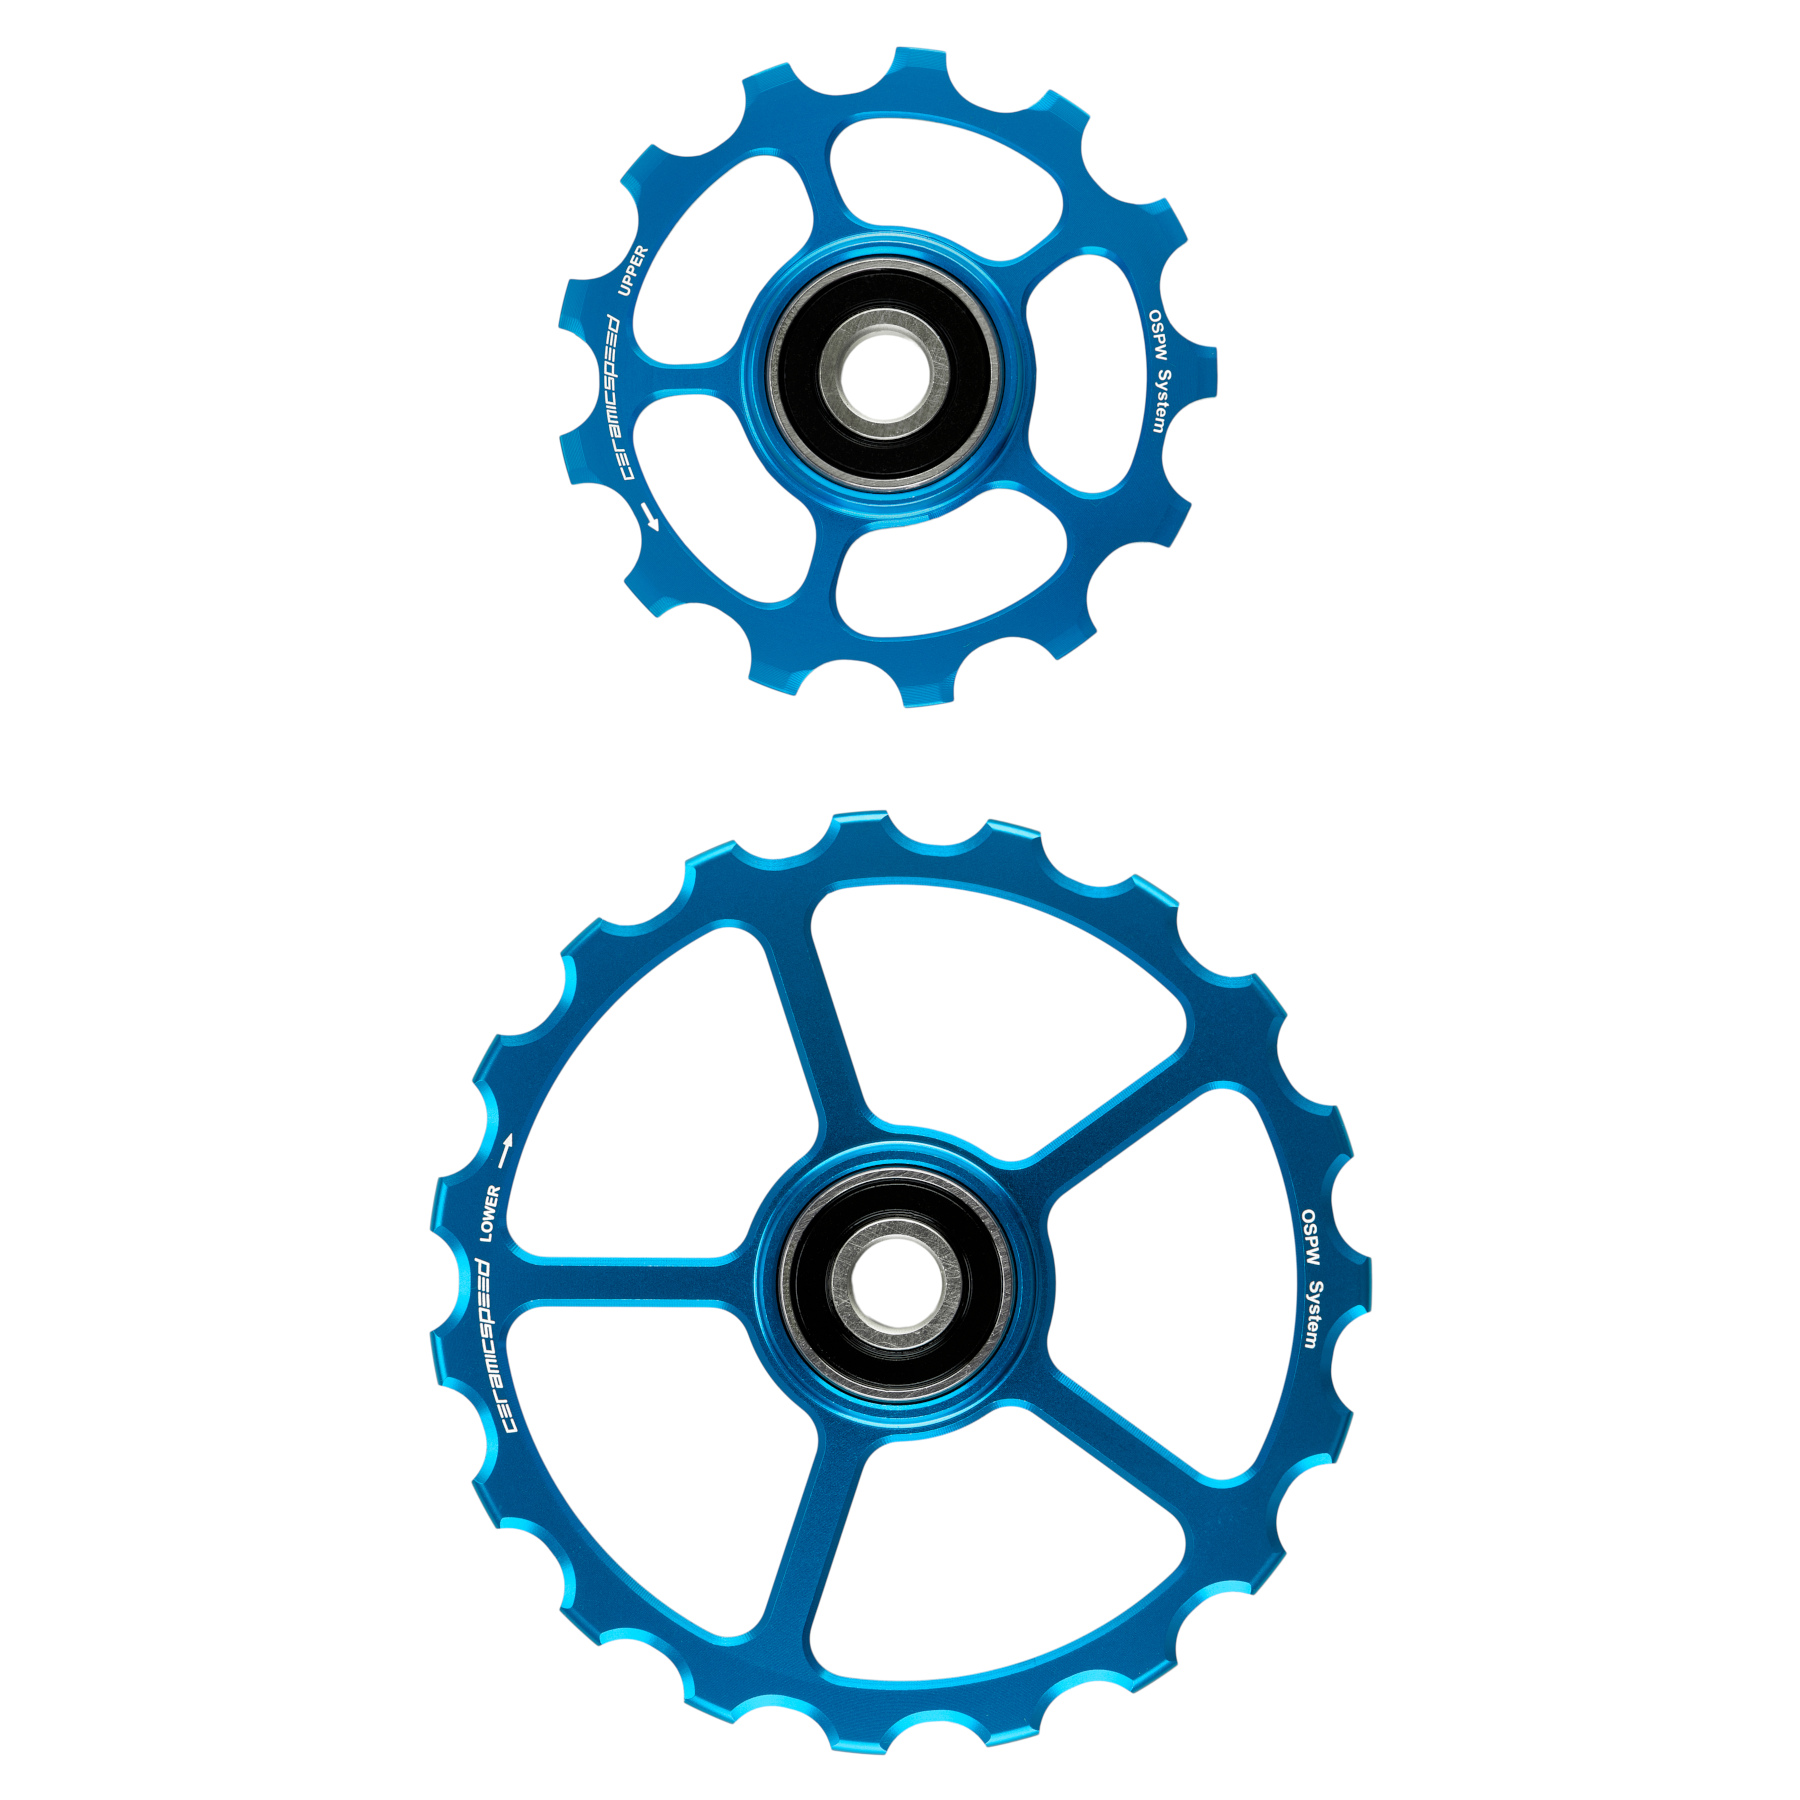 Image of CeramicSpeed Replacement Derailleur Pulleys - OSPW | 13/19 Teeth - blue